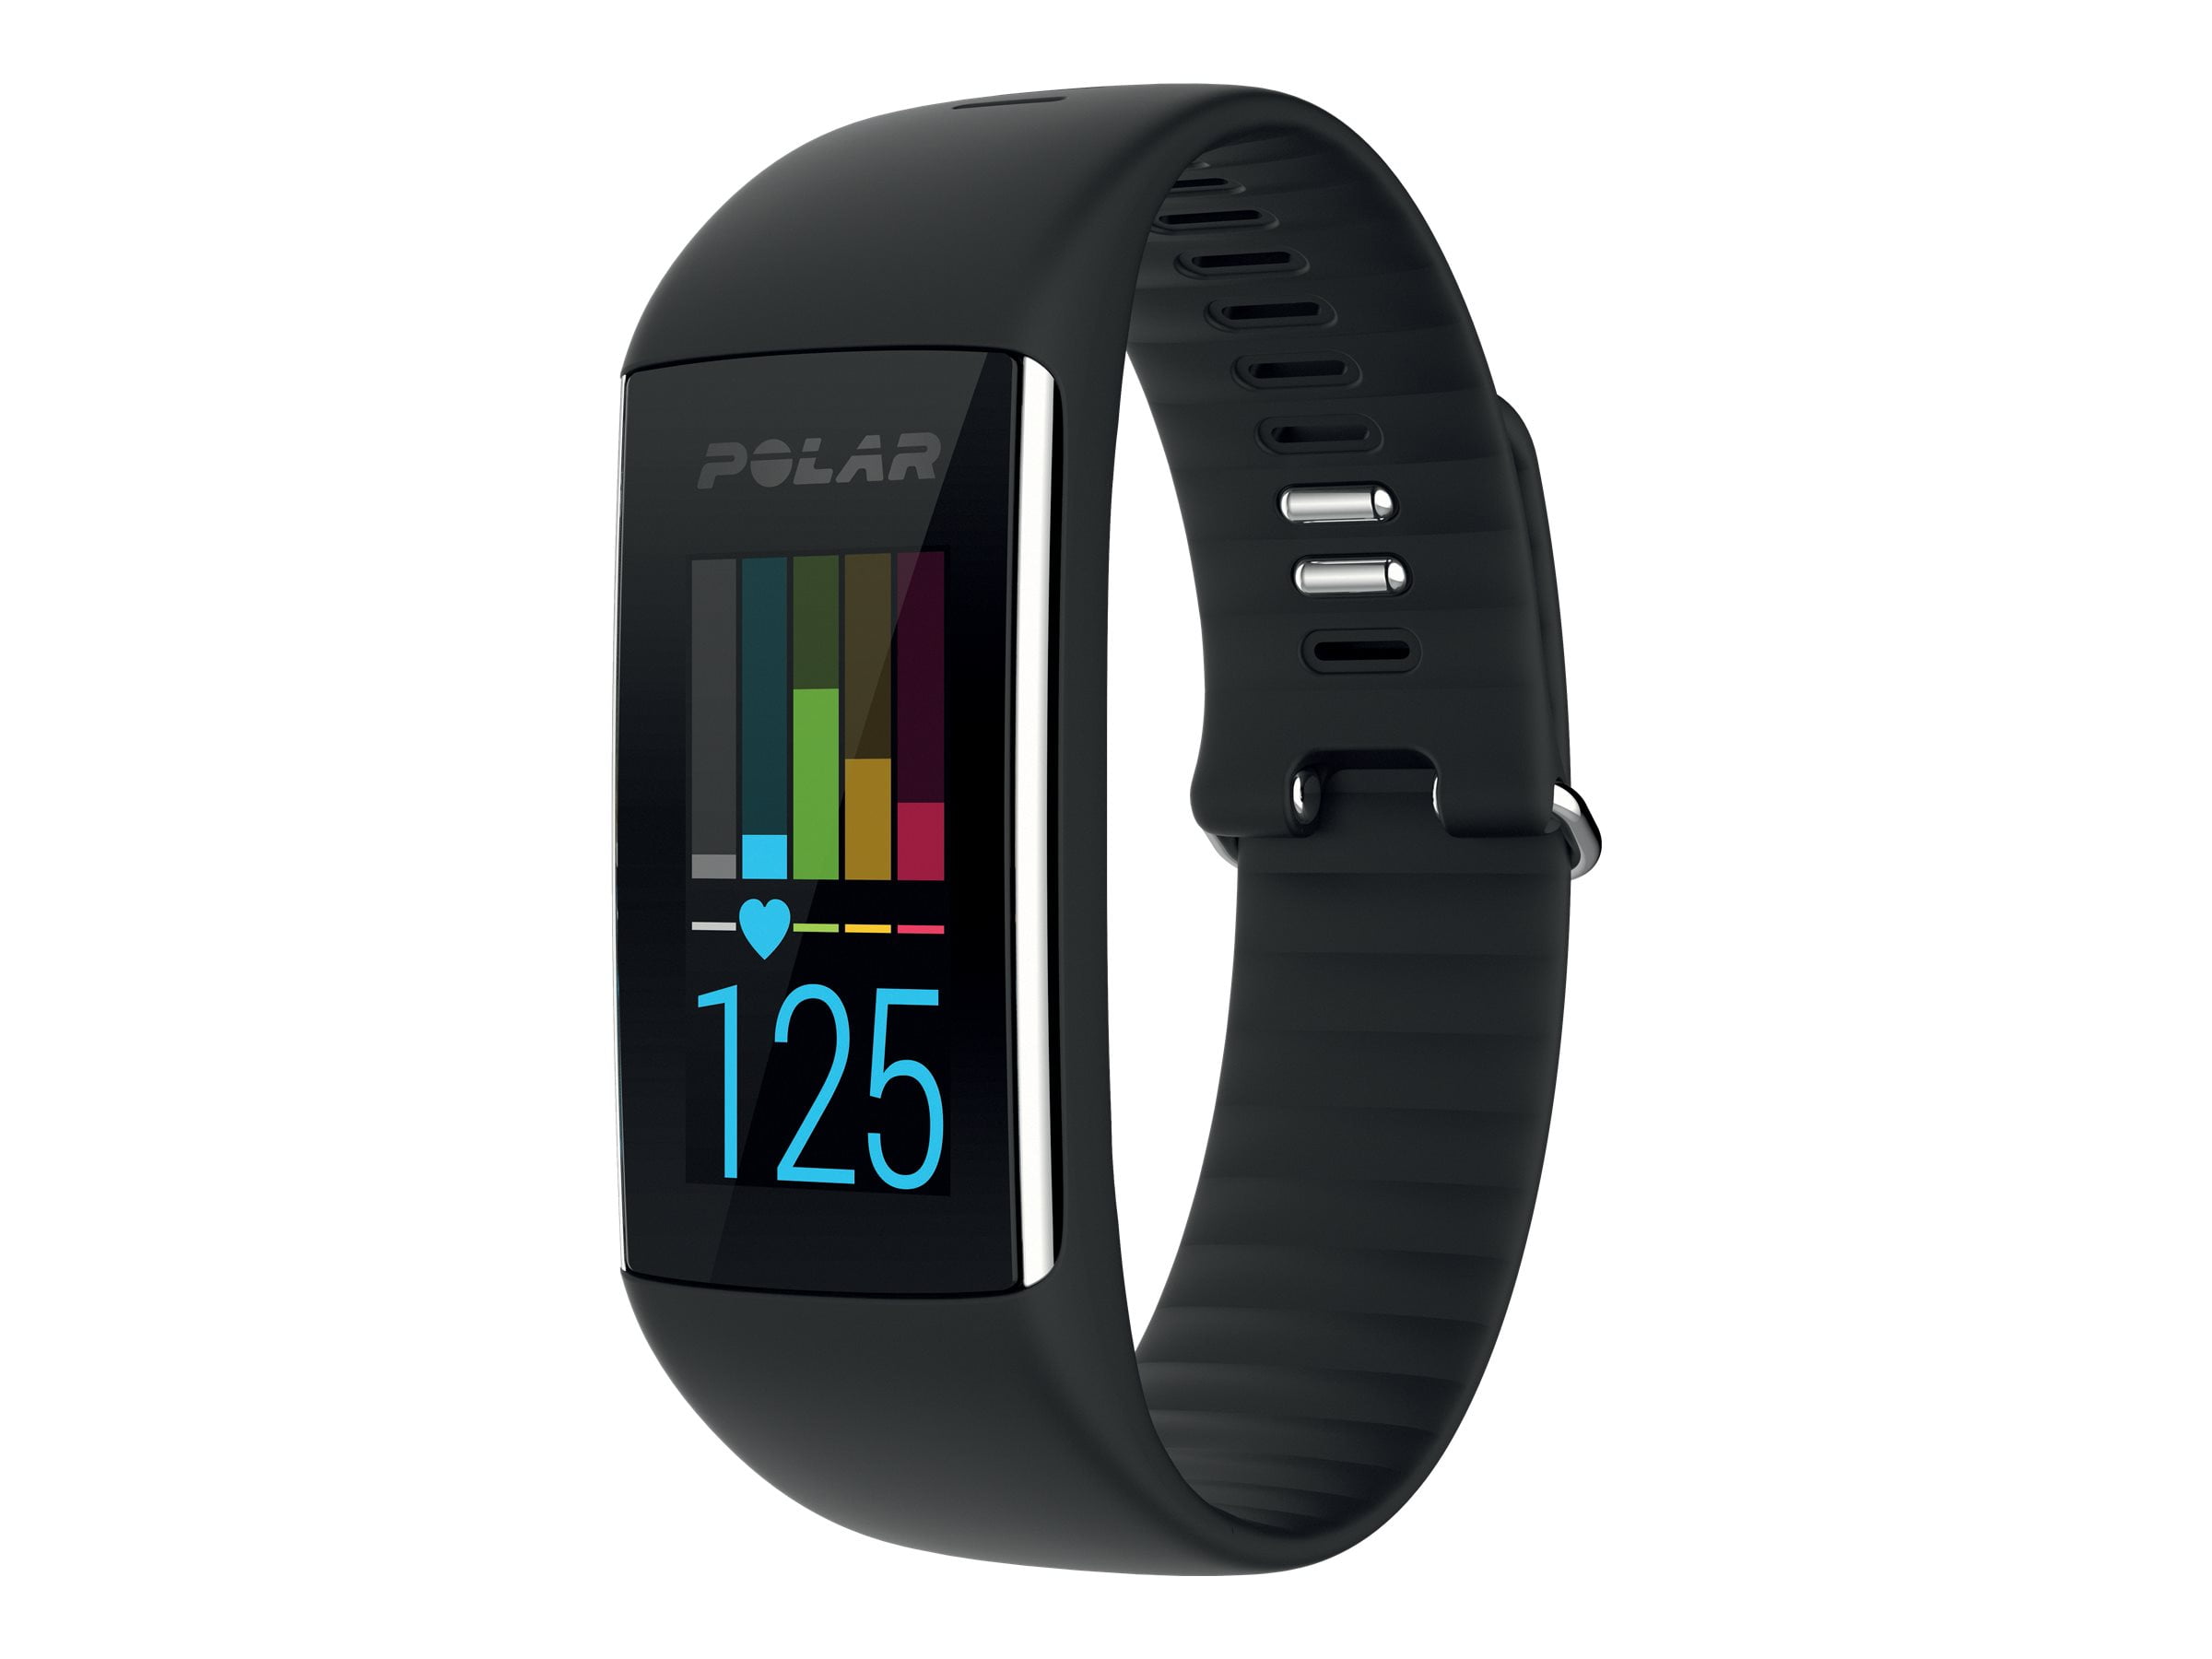 Polar A360 Fitness Tracker with Wrist Heart Rate Monitor 